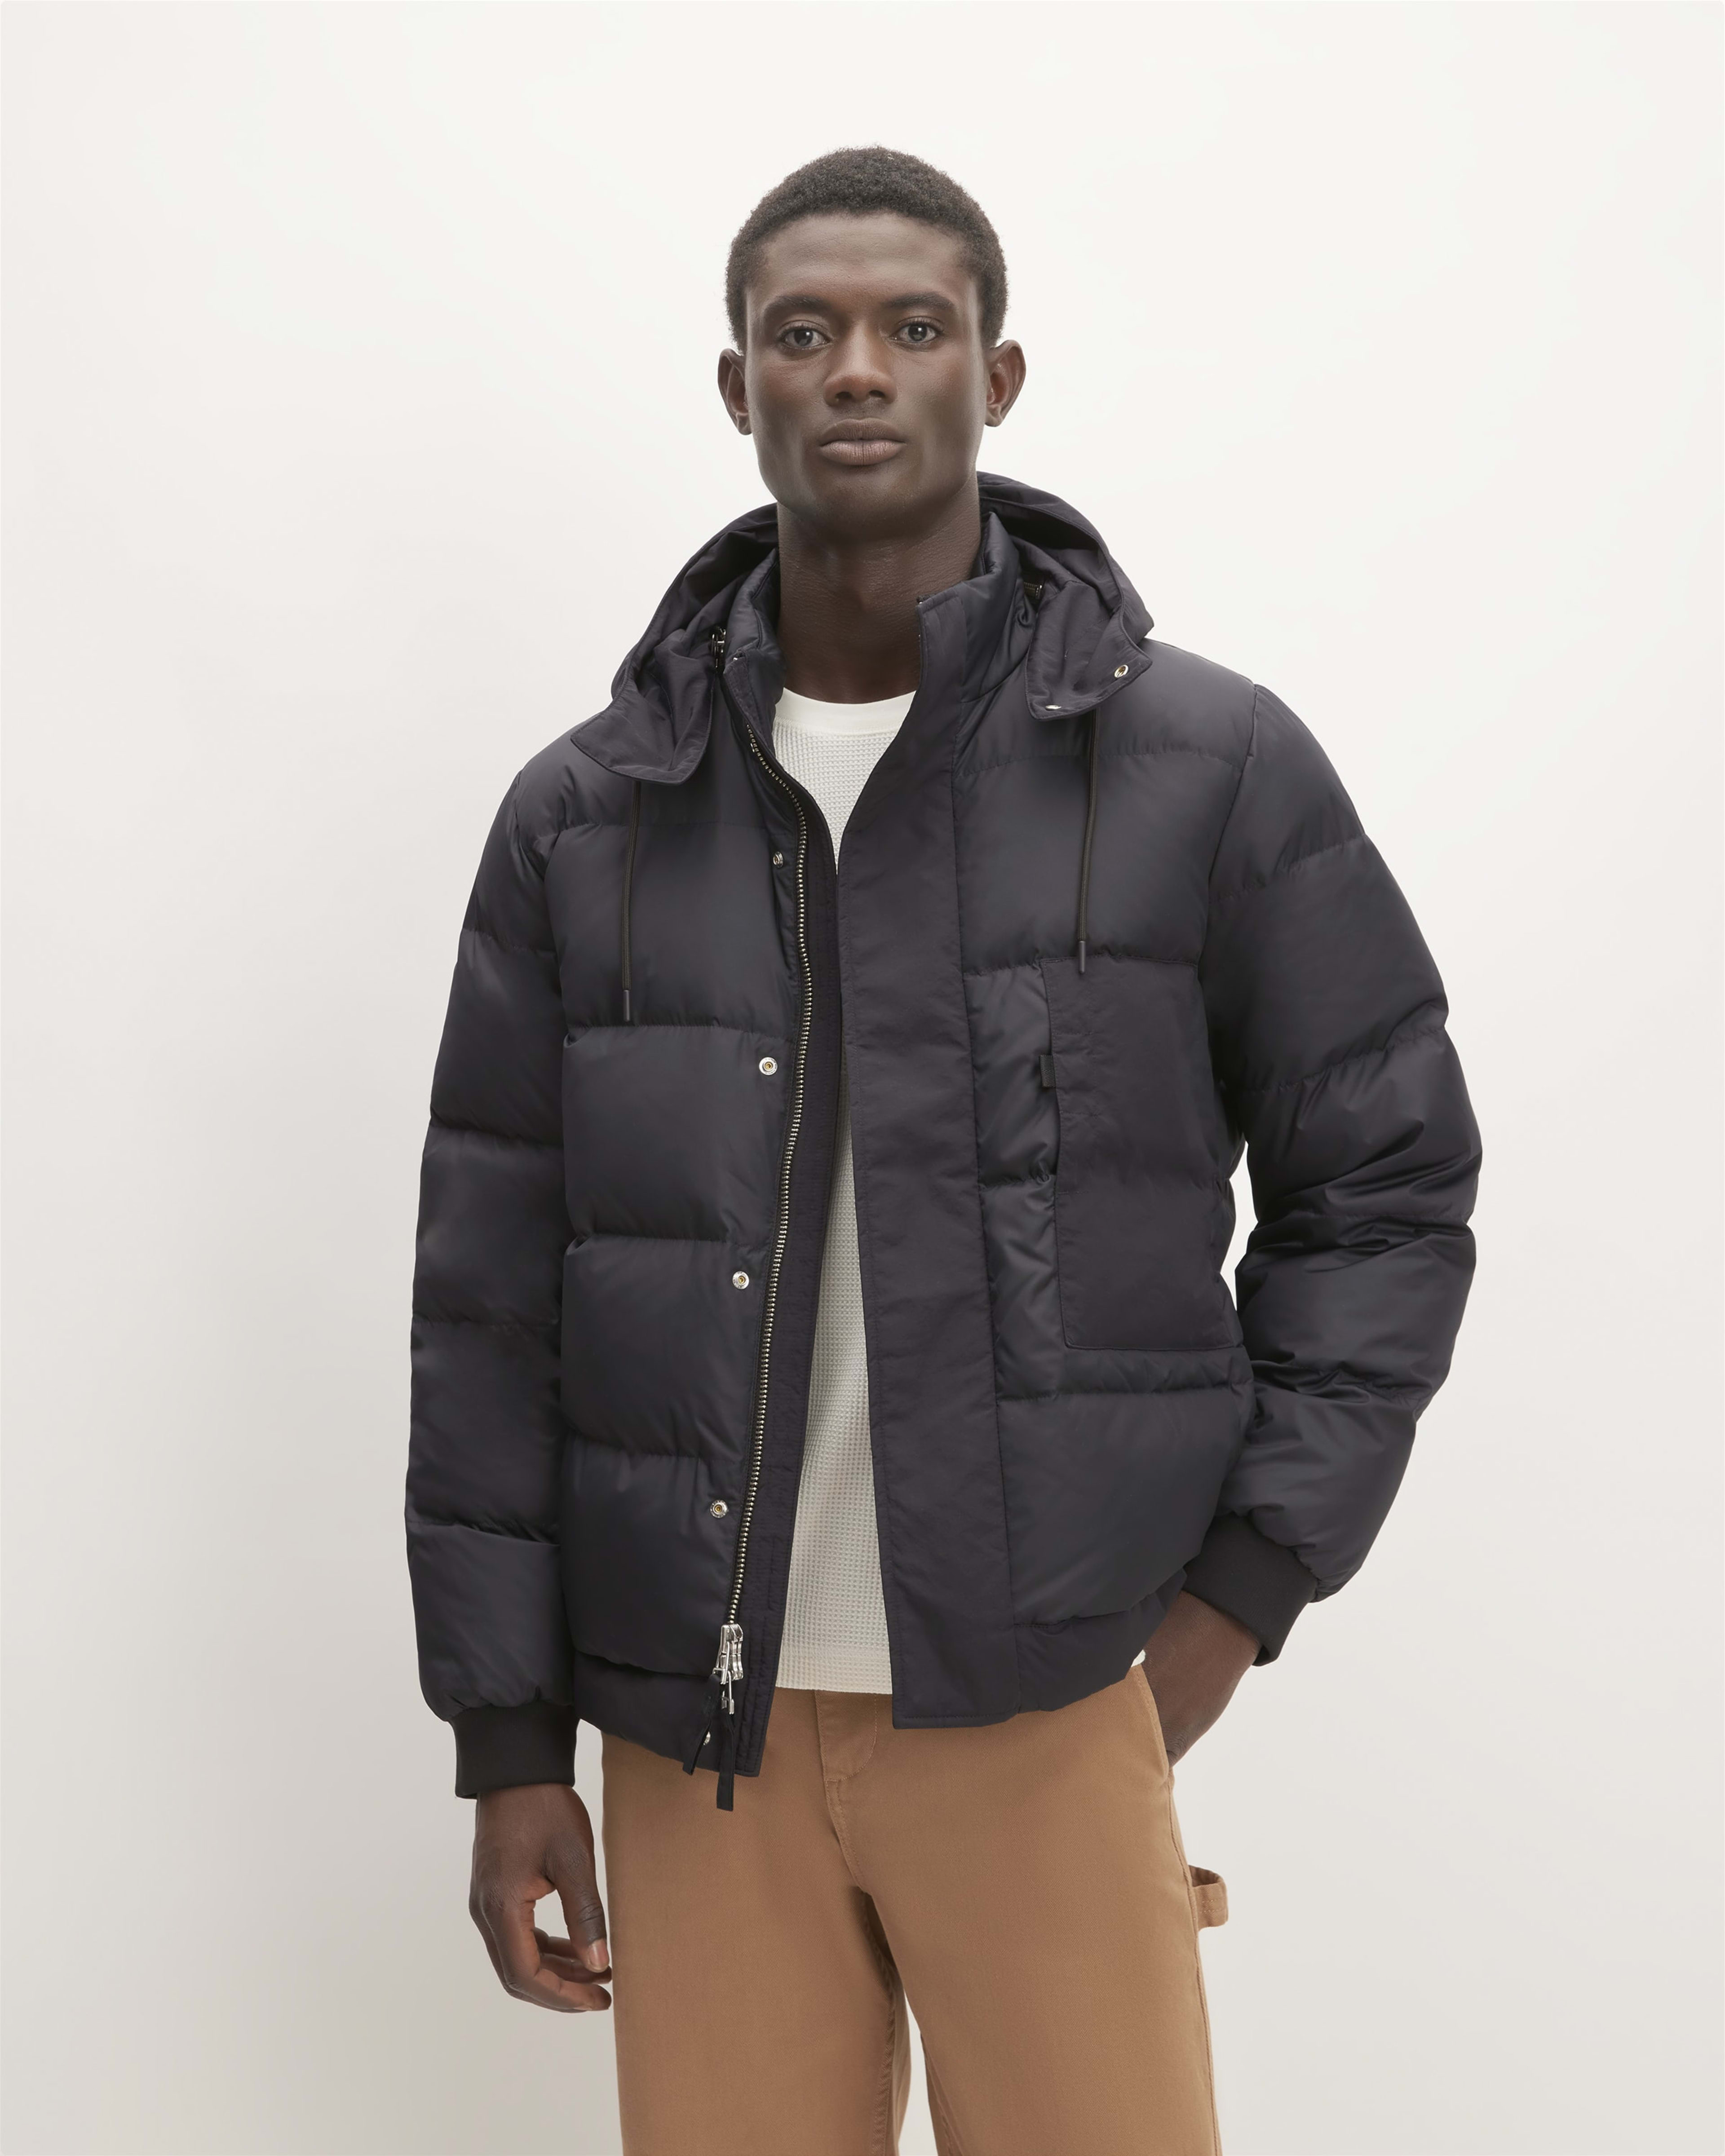 Men's Outerwear - Jackets & Coats  The Best Gifts for Him – Everlane